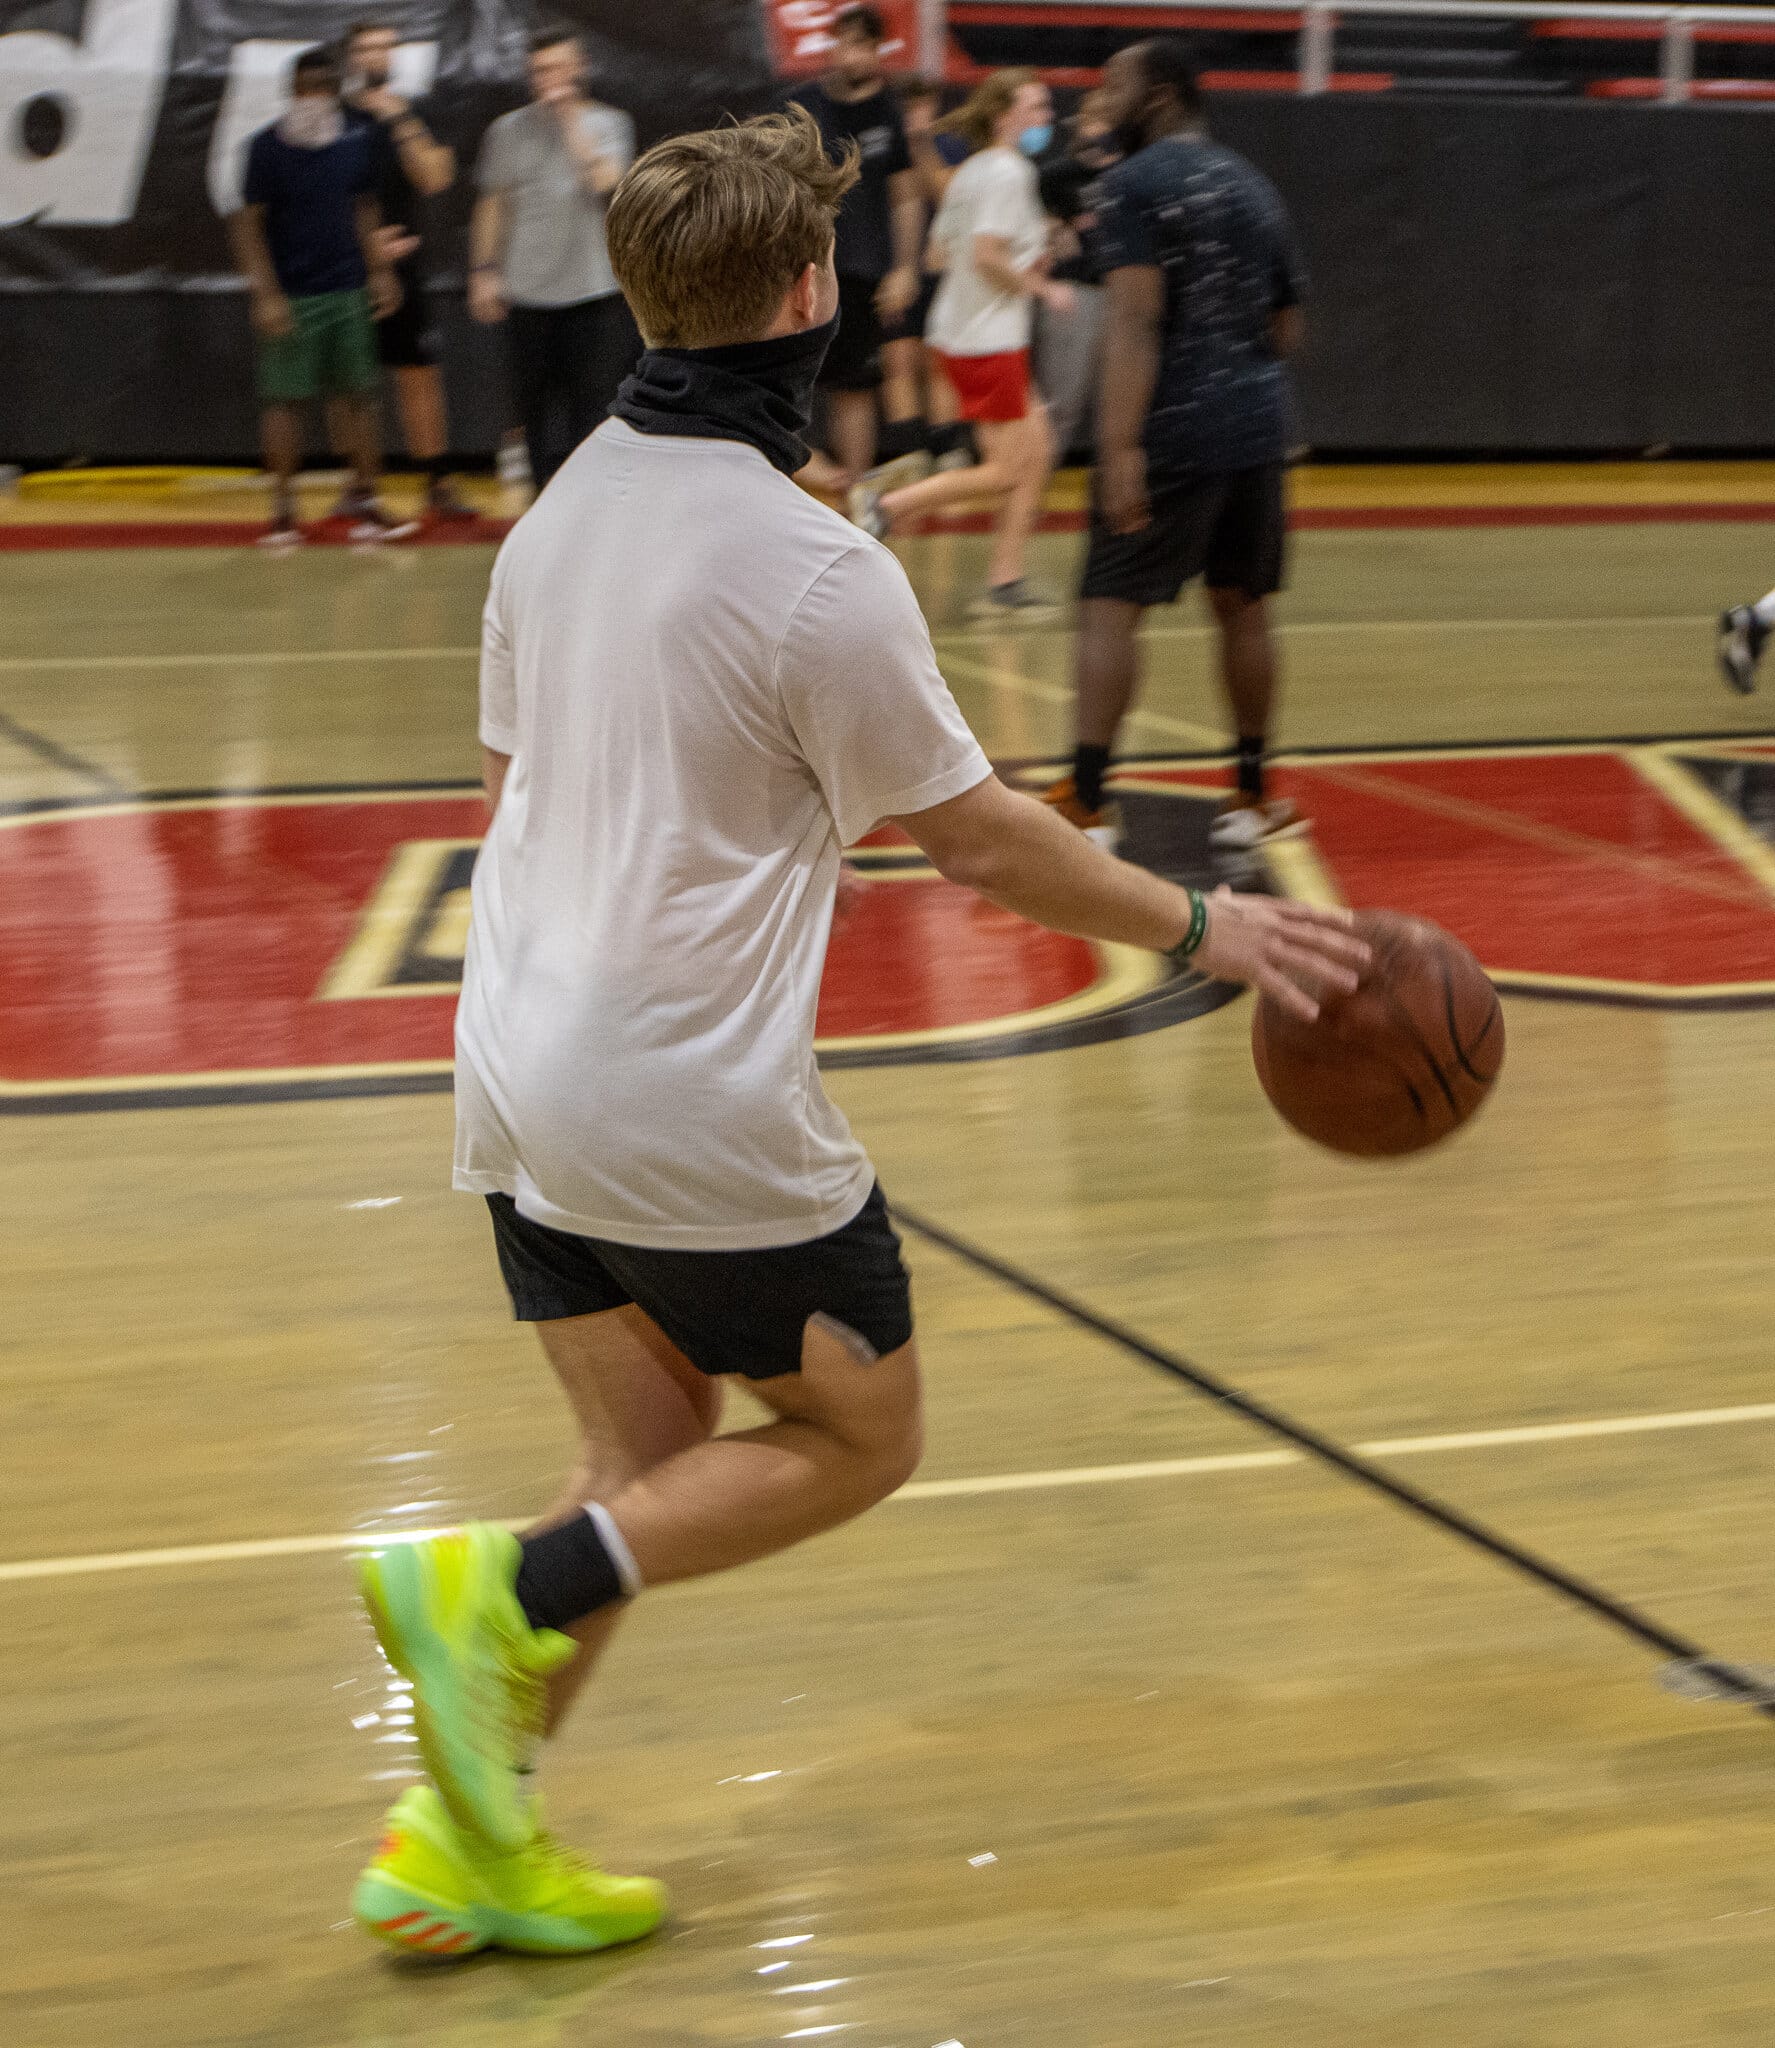 The intramural basketball season has become one of the favorite annual traditions of NGU.